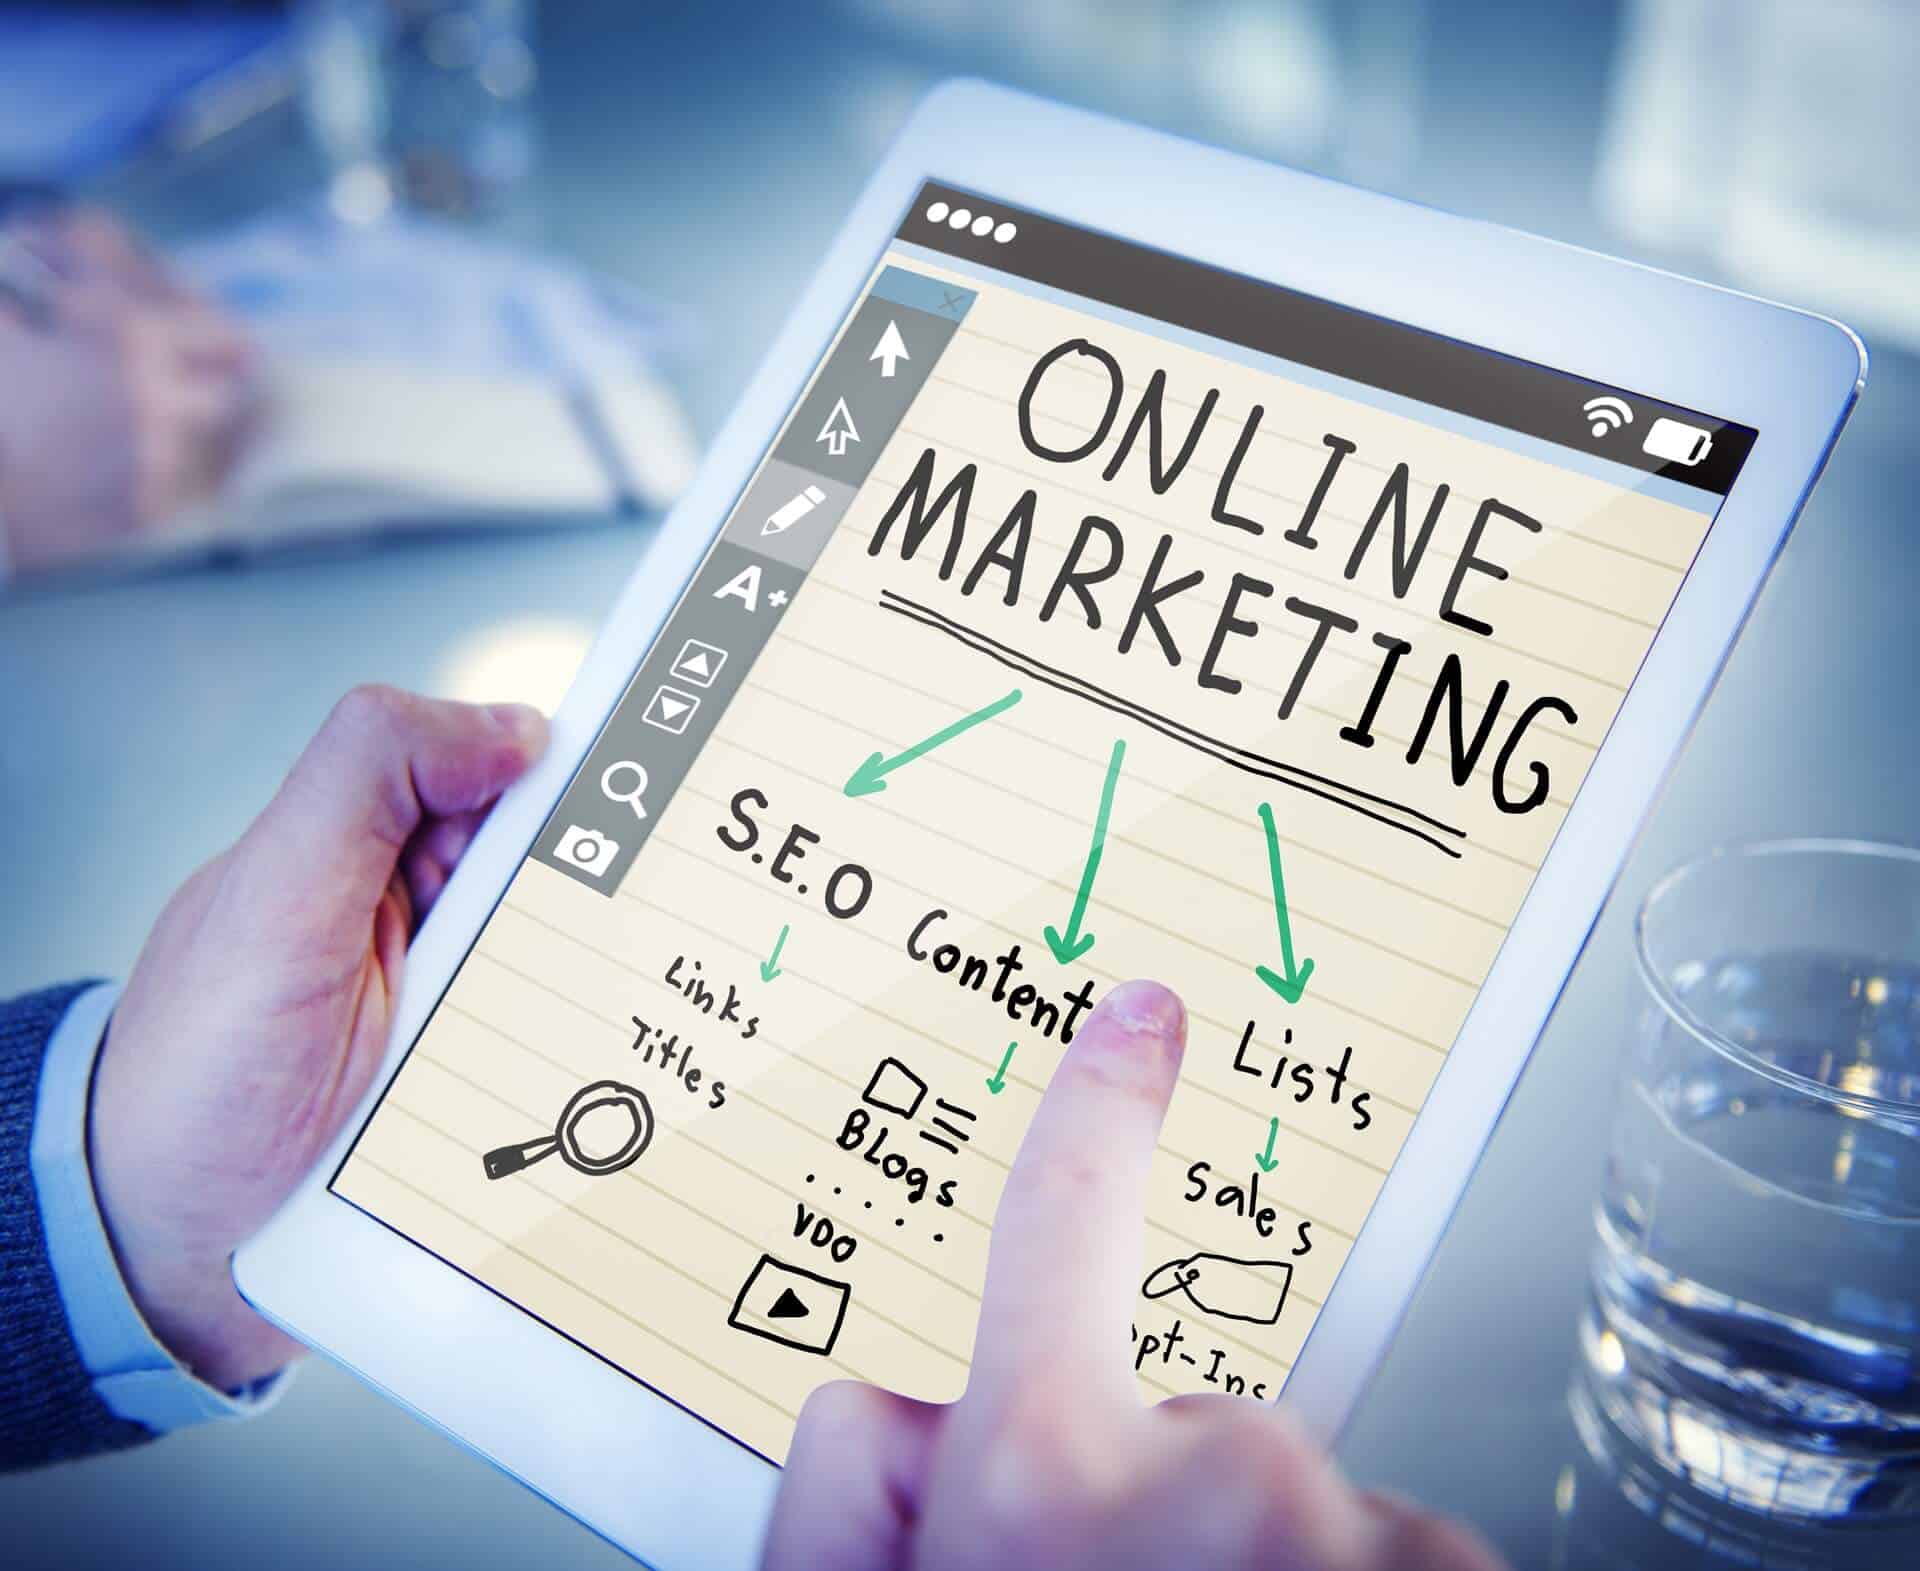 What Kind of Online Marketing Help Will I Get As A Business Coaching Franchise?